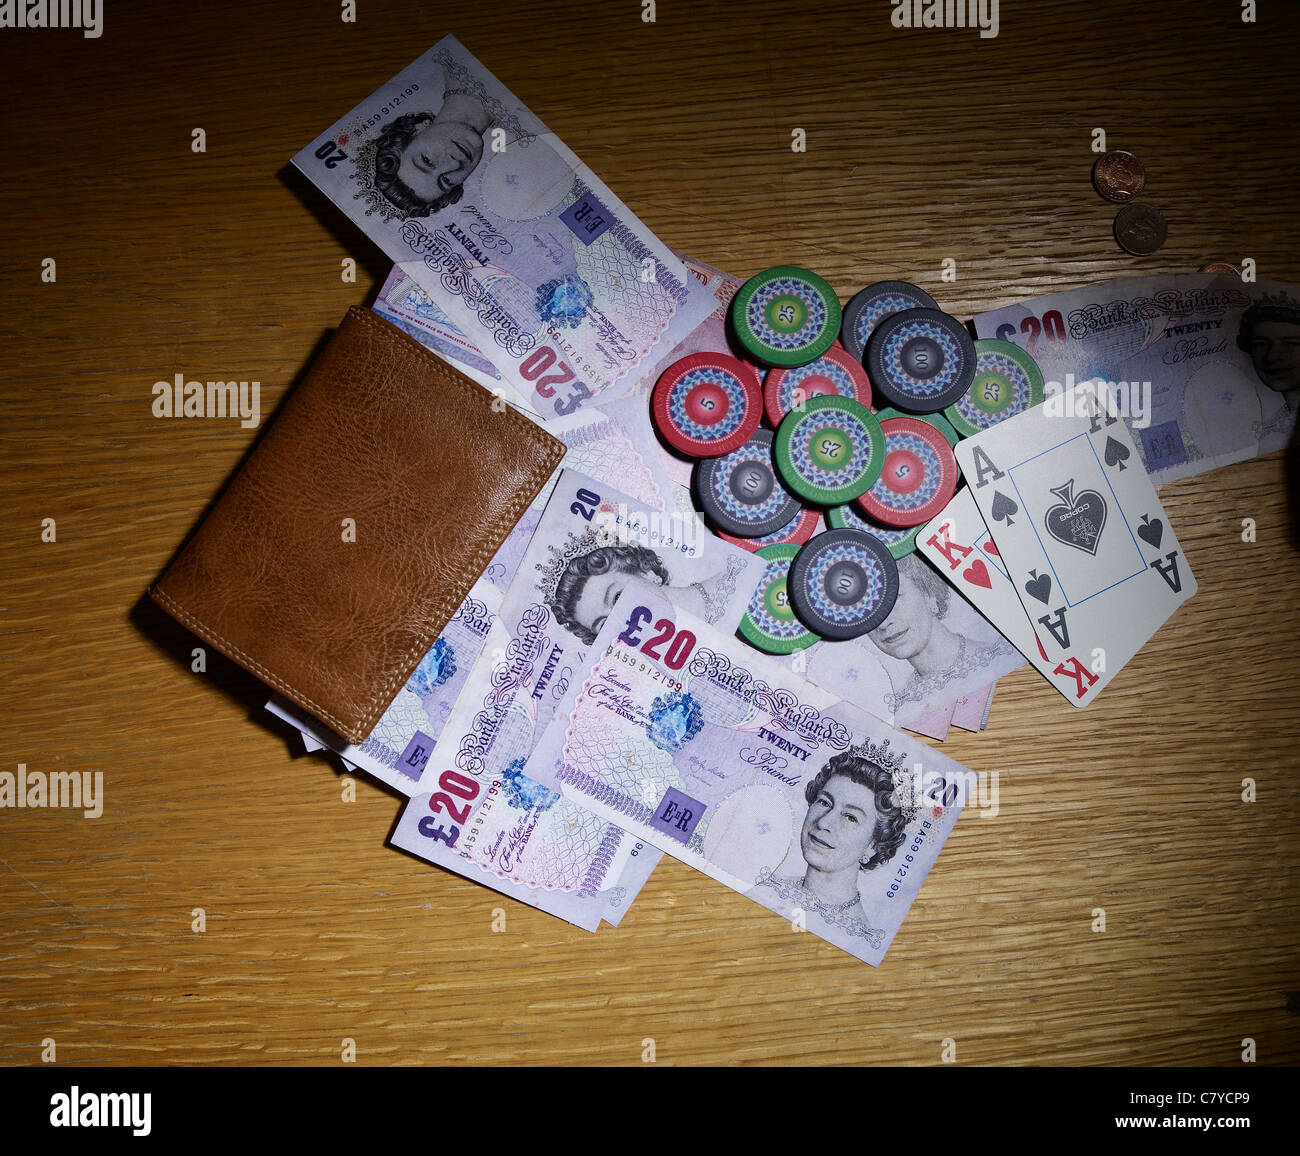 Wallet cash and poker chips Stock Photo